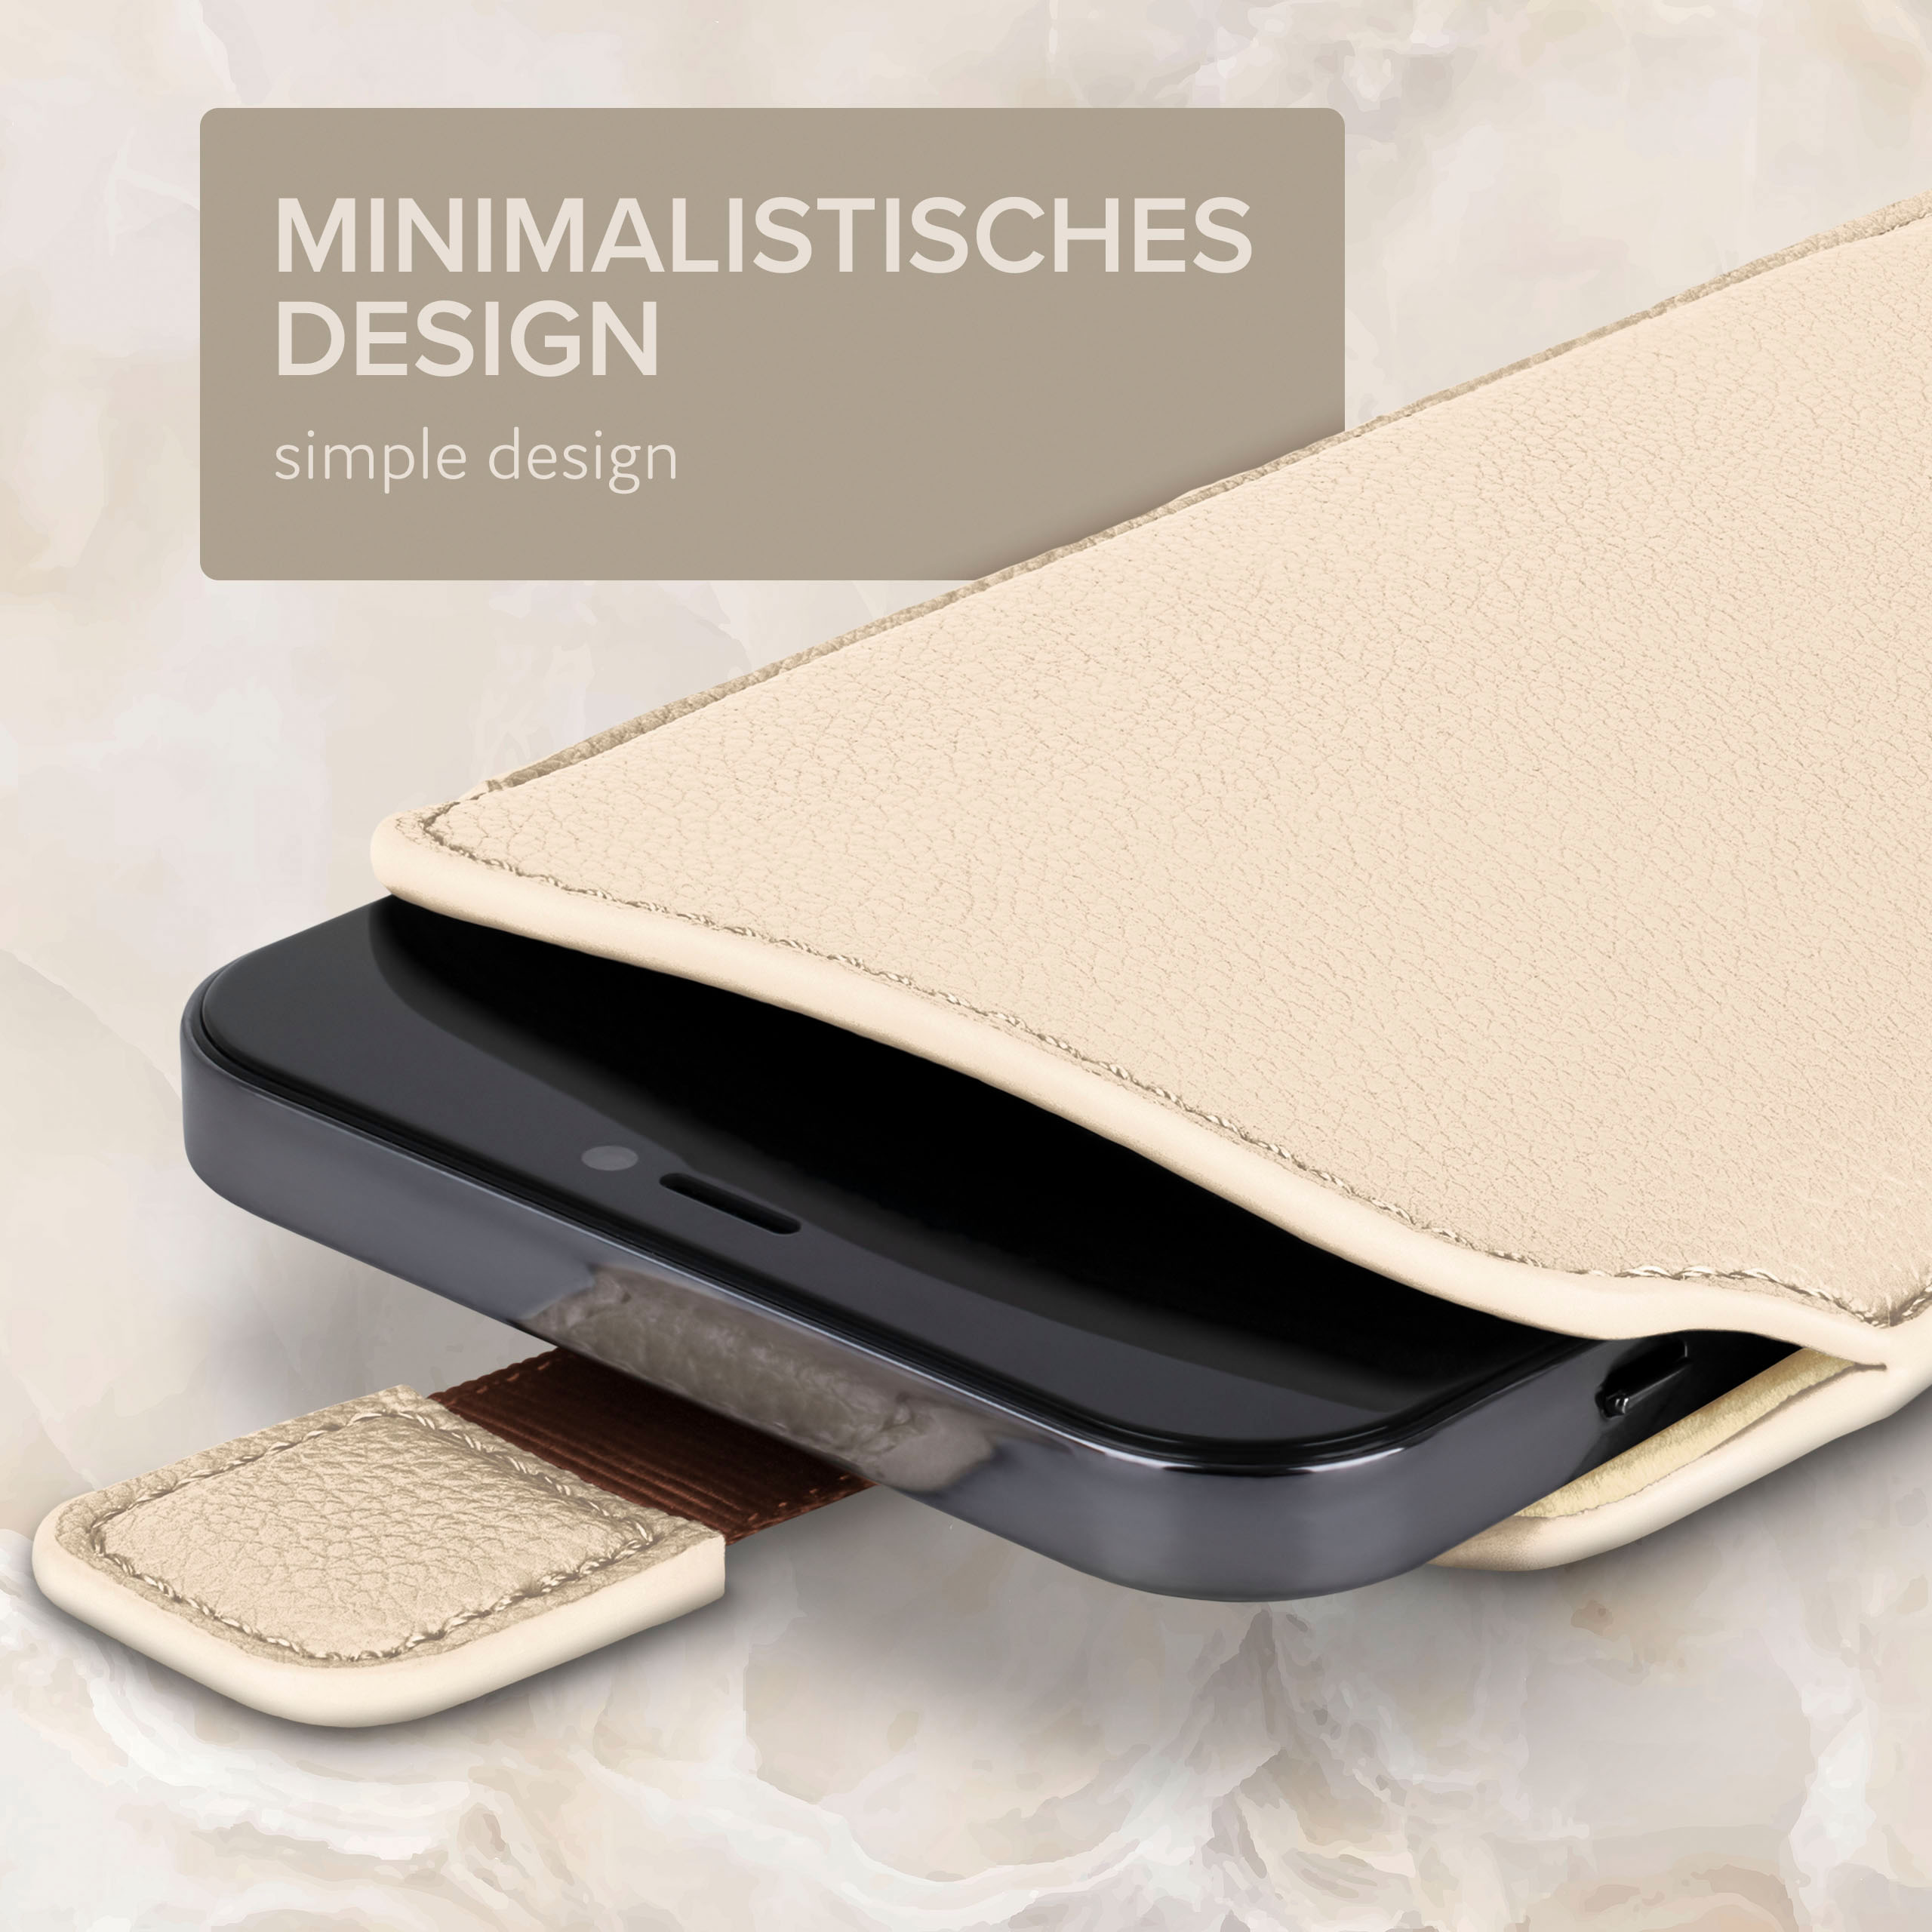 Full New Einsteckhülle ONEFLOW Creme mit Pro Ed, Cover, Huawei, P30 Zuglasche, Pro/P30